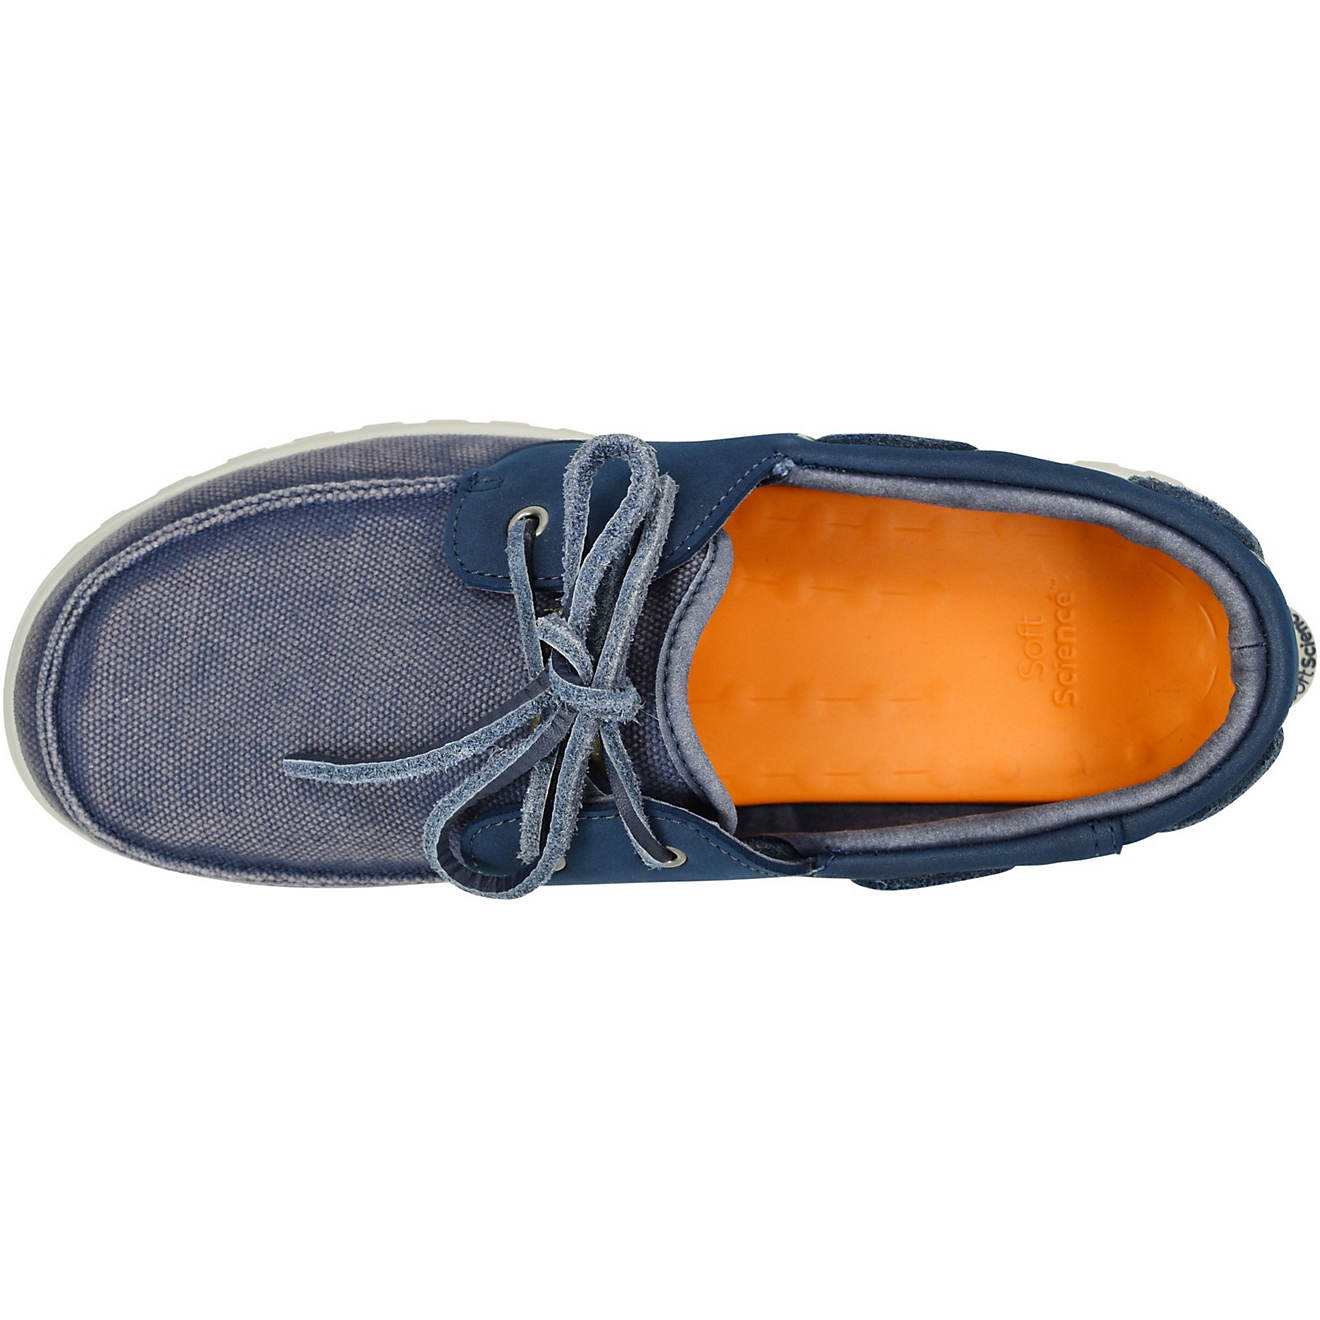 SoftScience Men's Cruise Canvas Boat Shoes | Academy